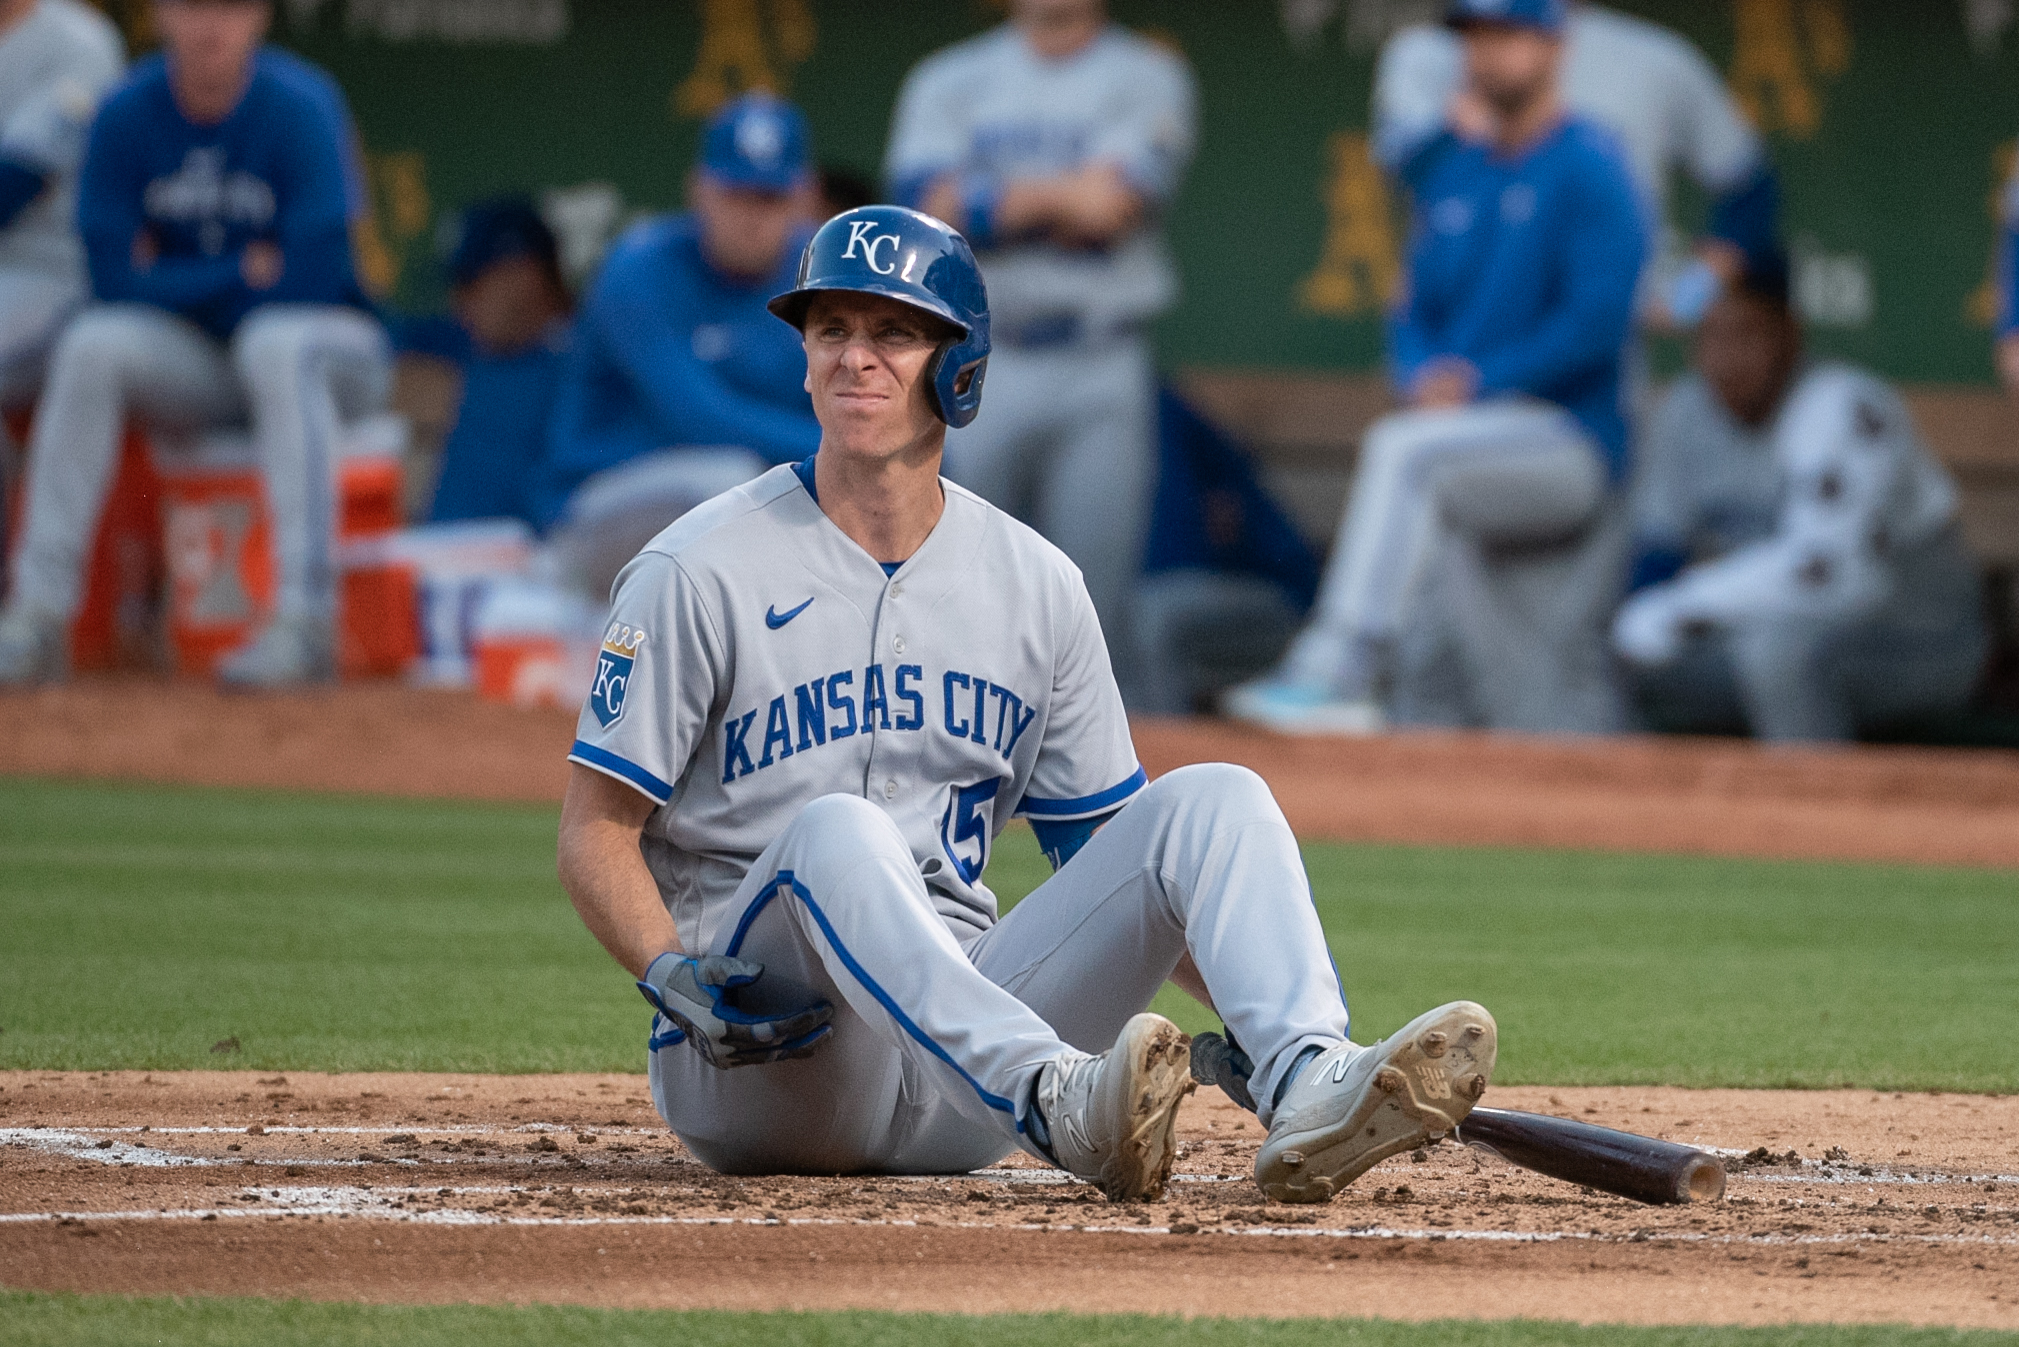 Kansas City Royals first baseman Matt Duffy (15) sits down at home plate after avoiding a pitch during the second inningagainst the Oakland Athletics at Oakland-Alameda County Coliseum. 